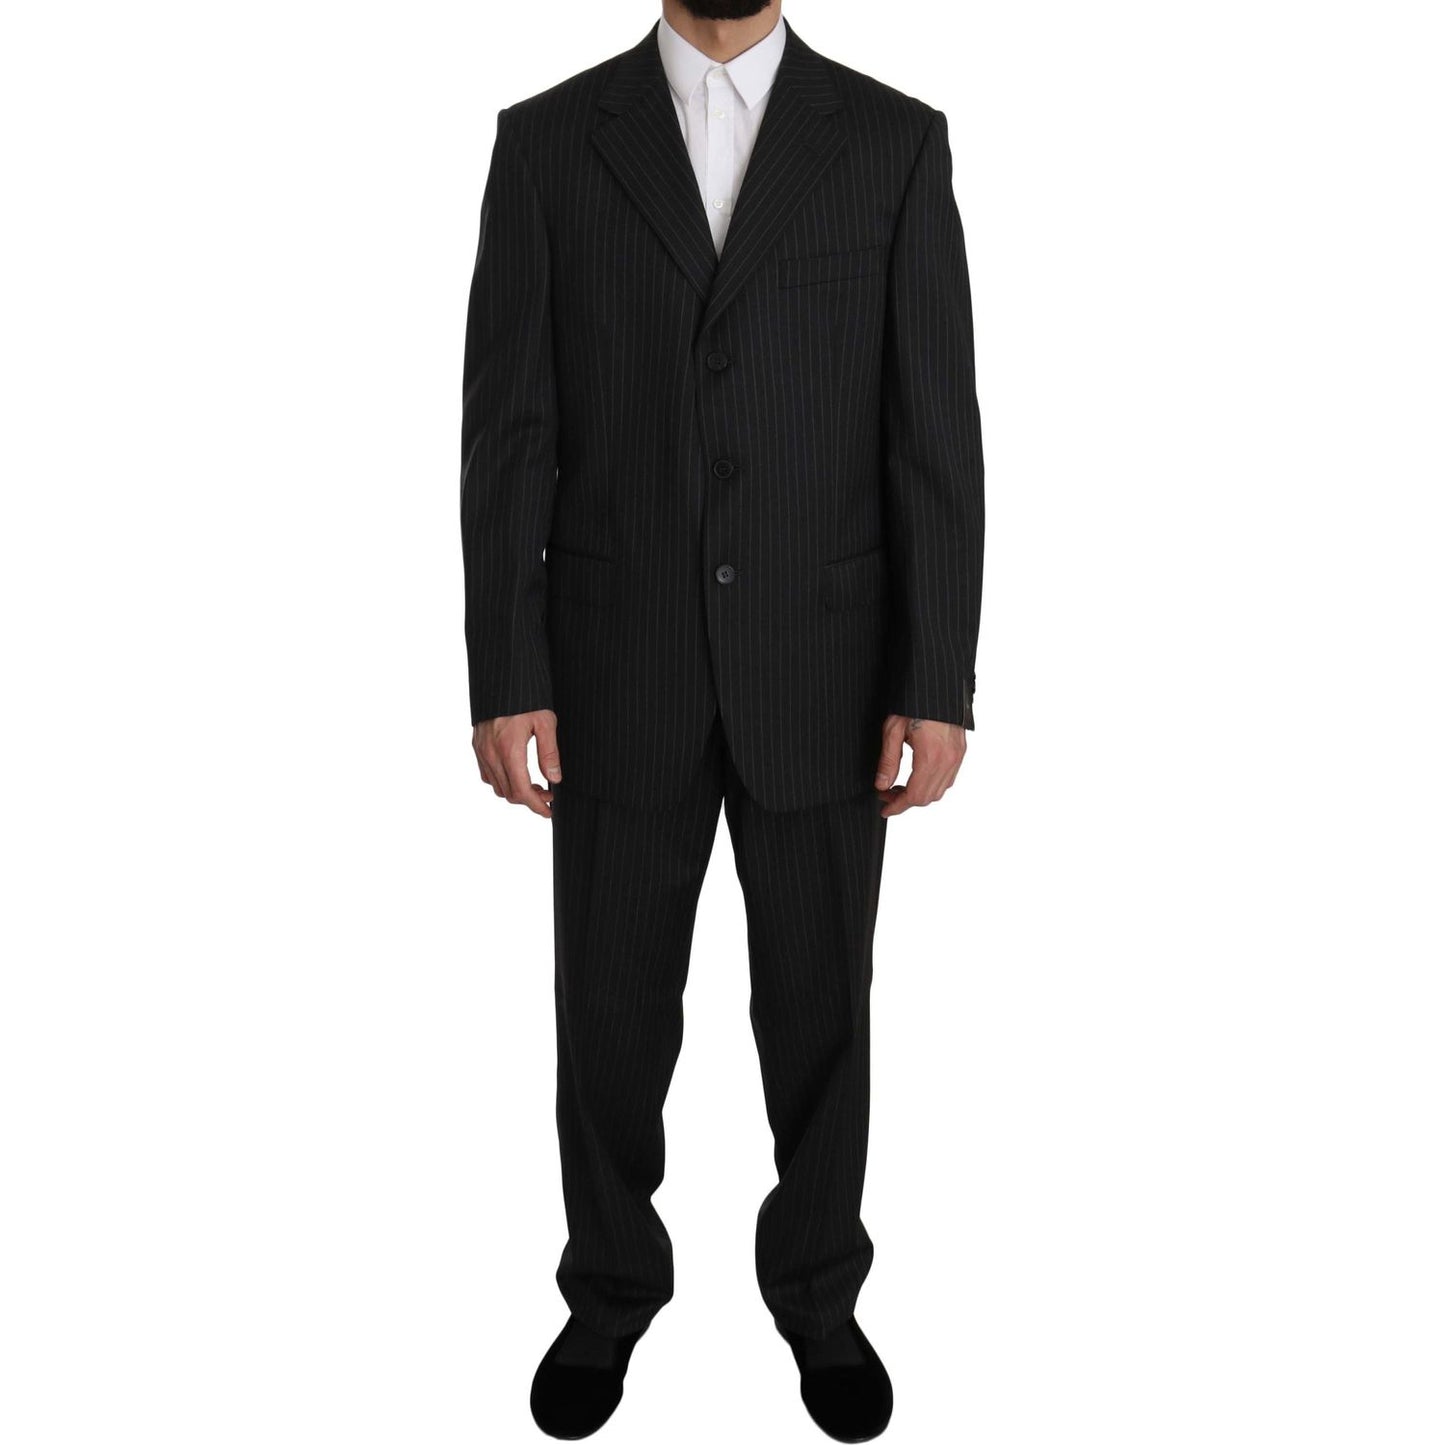 Z ZEGNA Elegant Black Striped Wool Suit black-striped-two-piece-3-button-100-wool-suit Suit IMG_7796-scaled.jpg